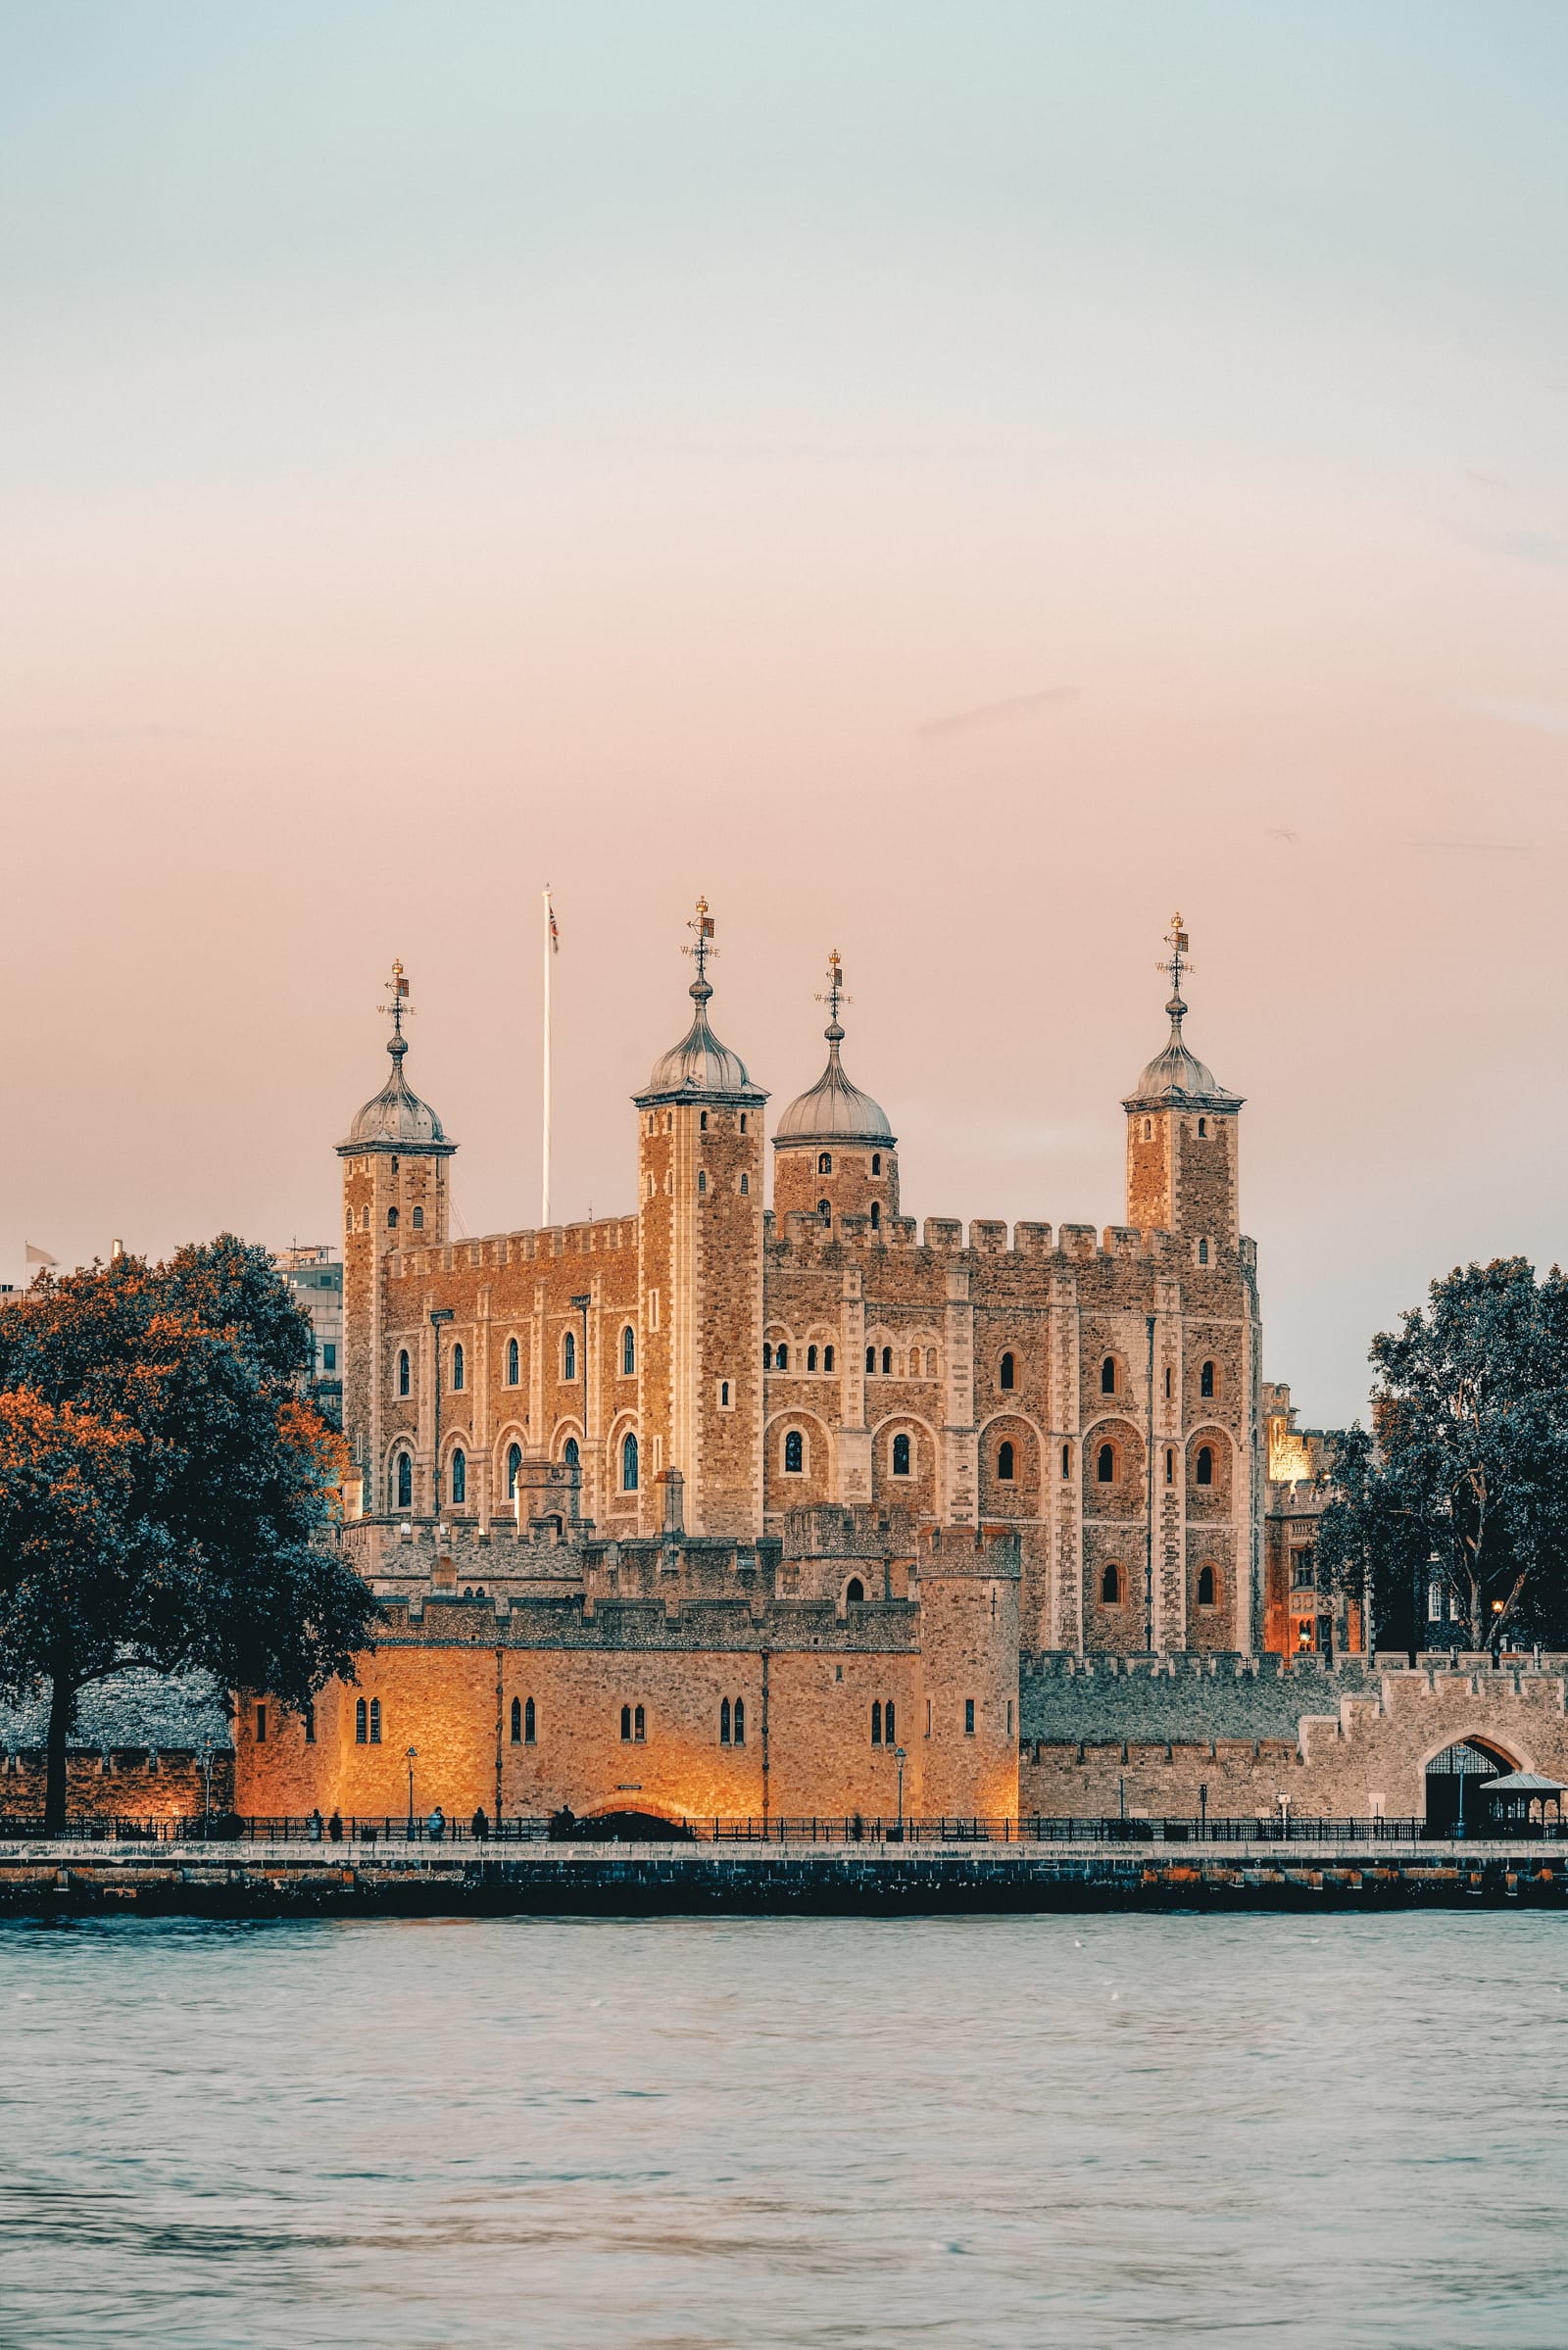 10 Beautiful Palaces In London You Have To Visit (18)